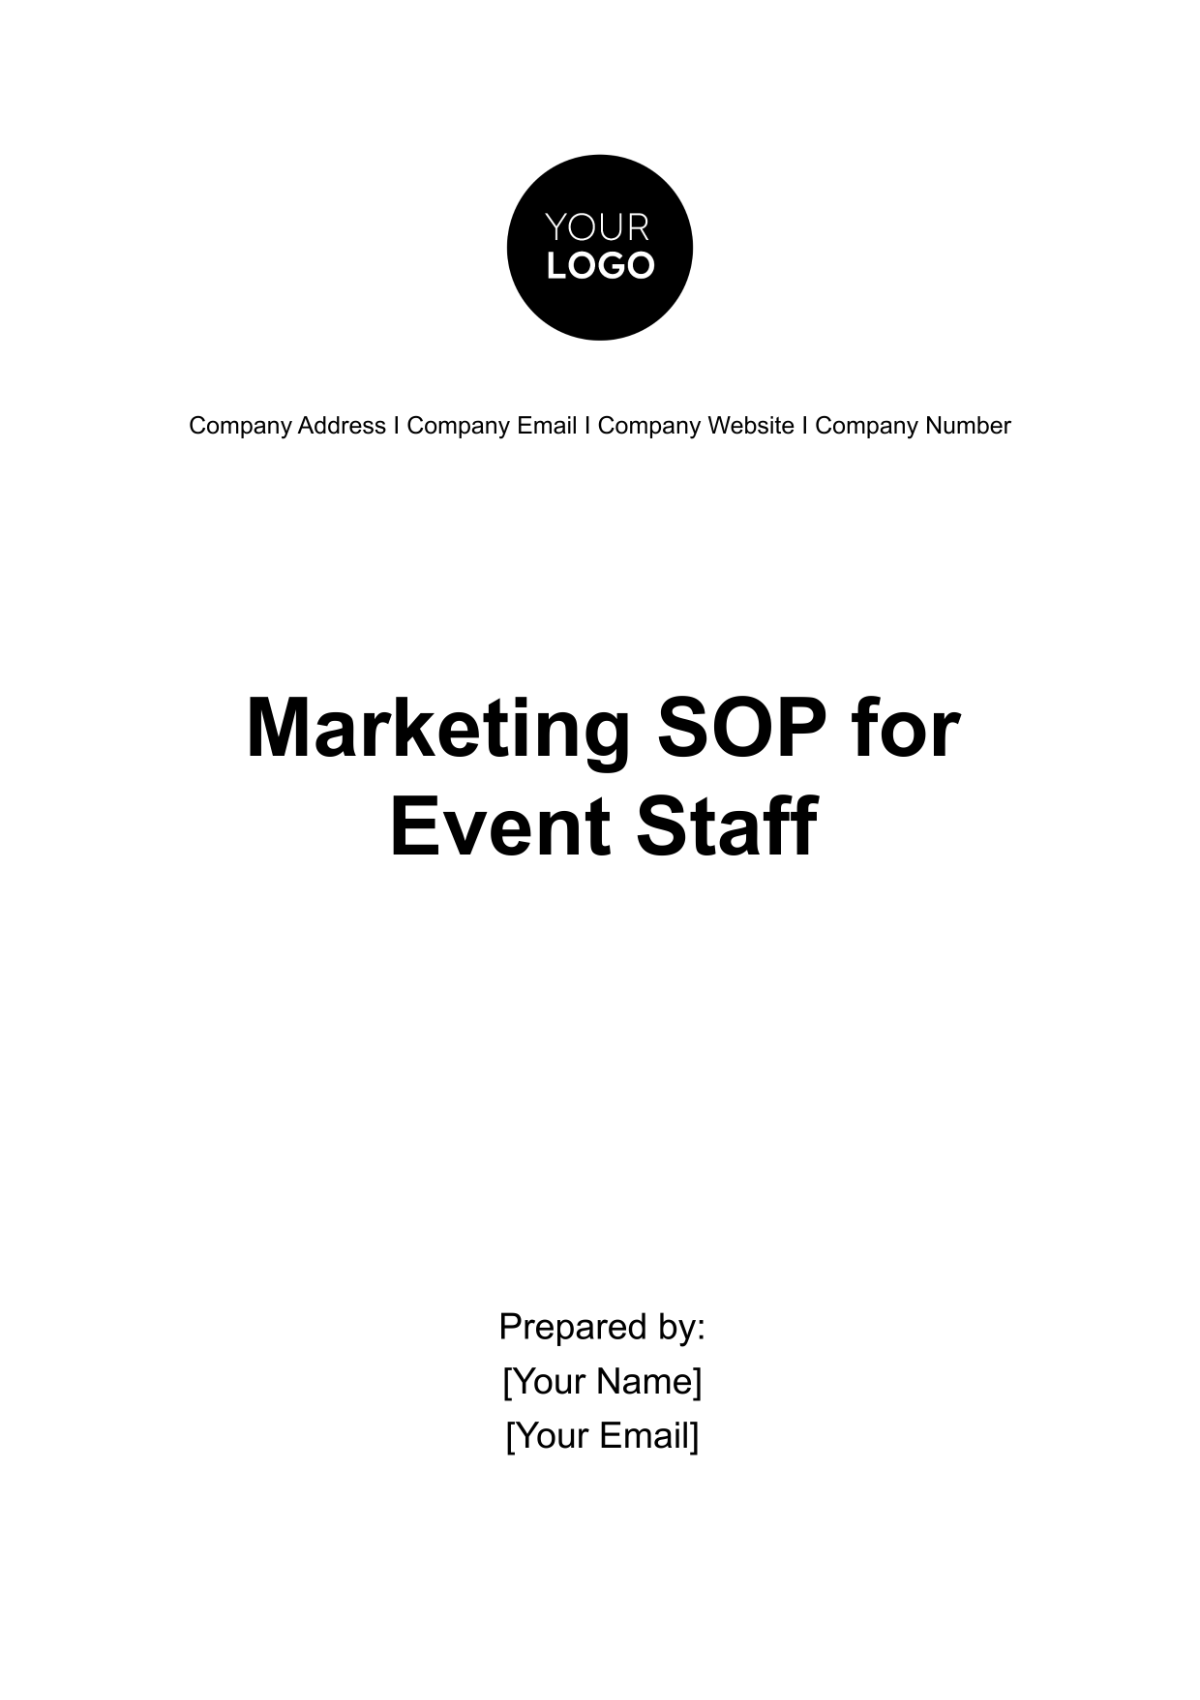 Marketing Standard Operating Procedure for Event Staff Template